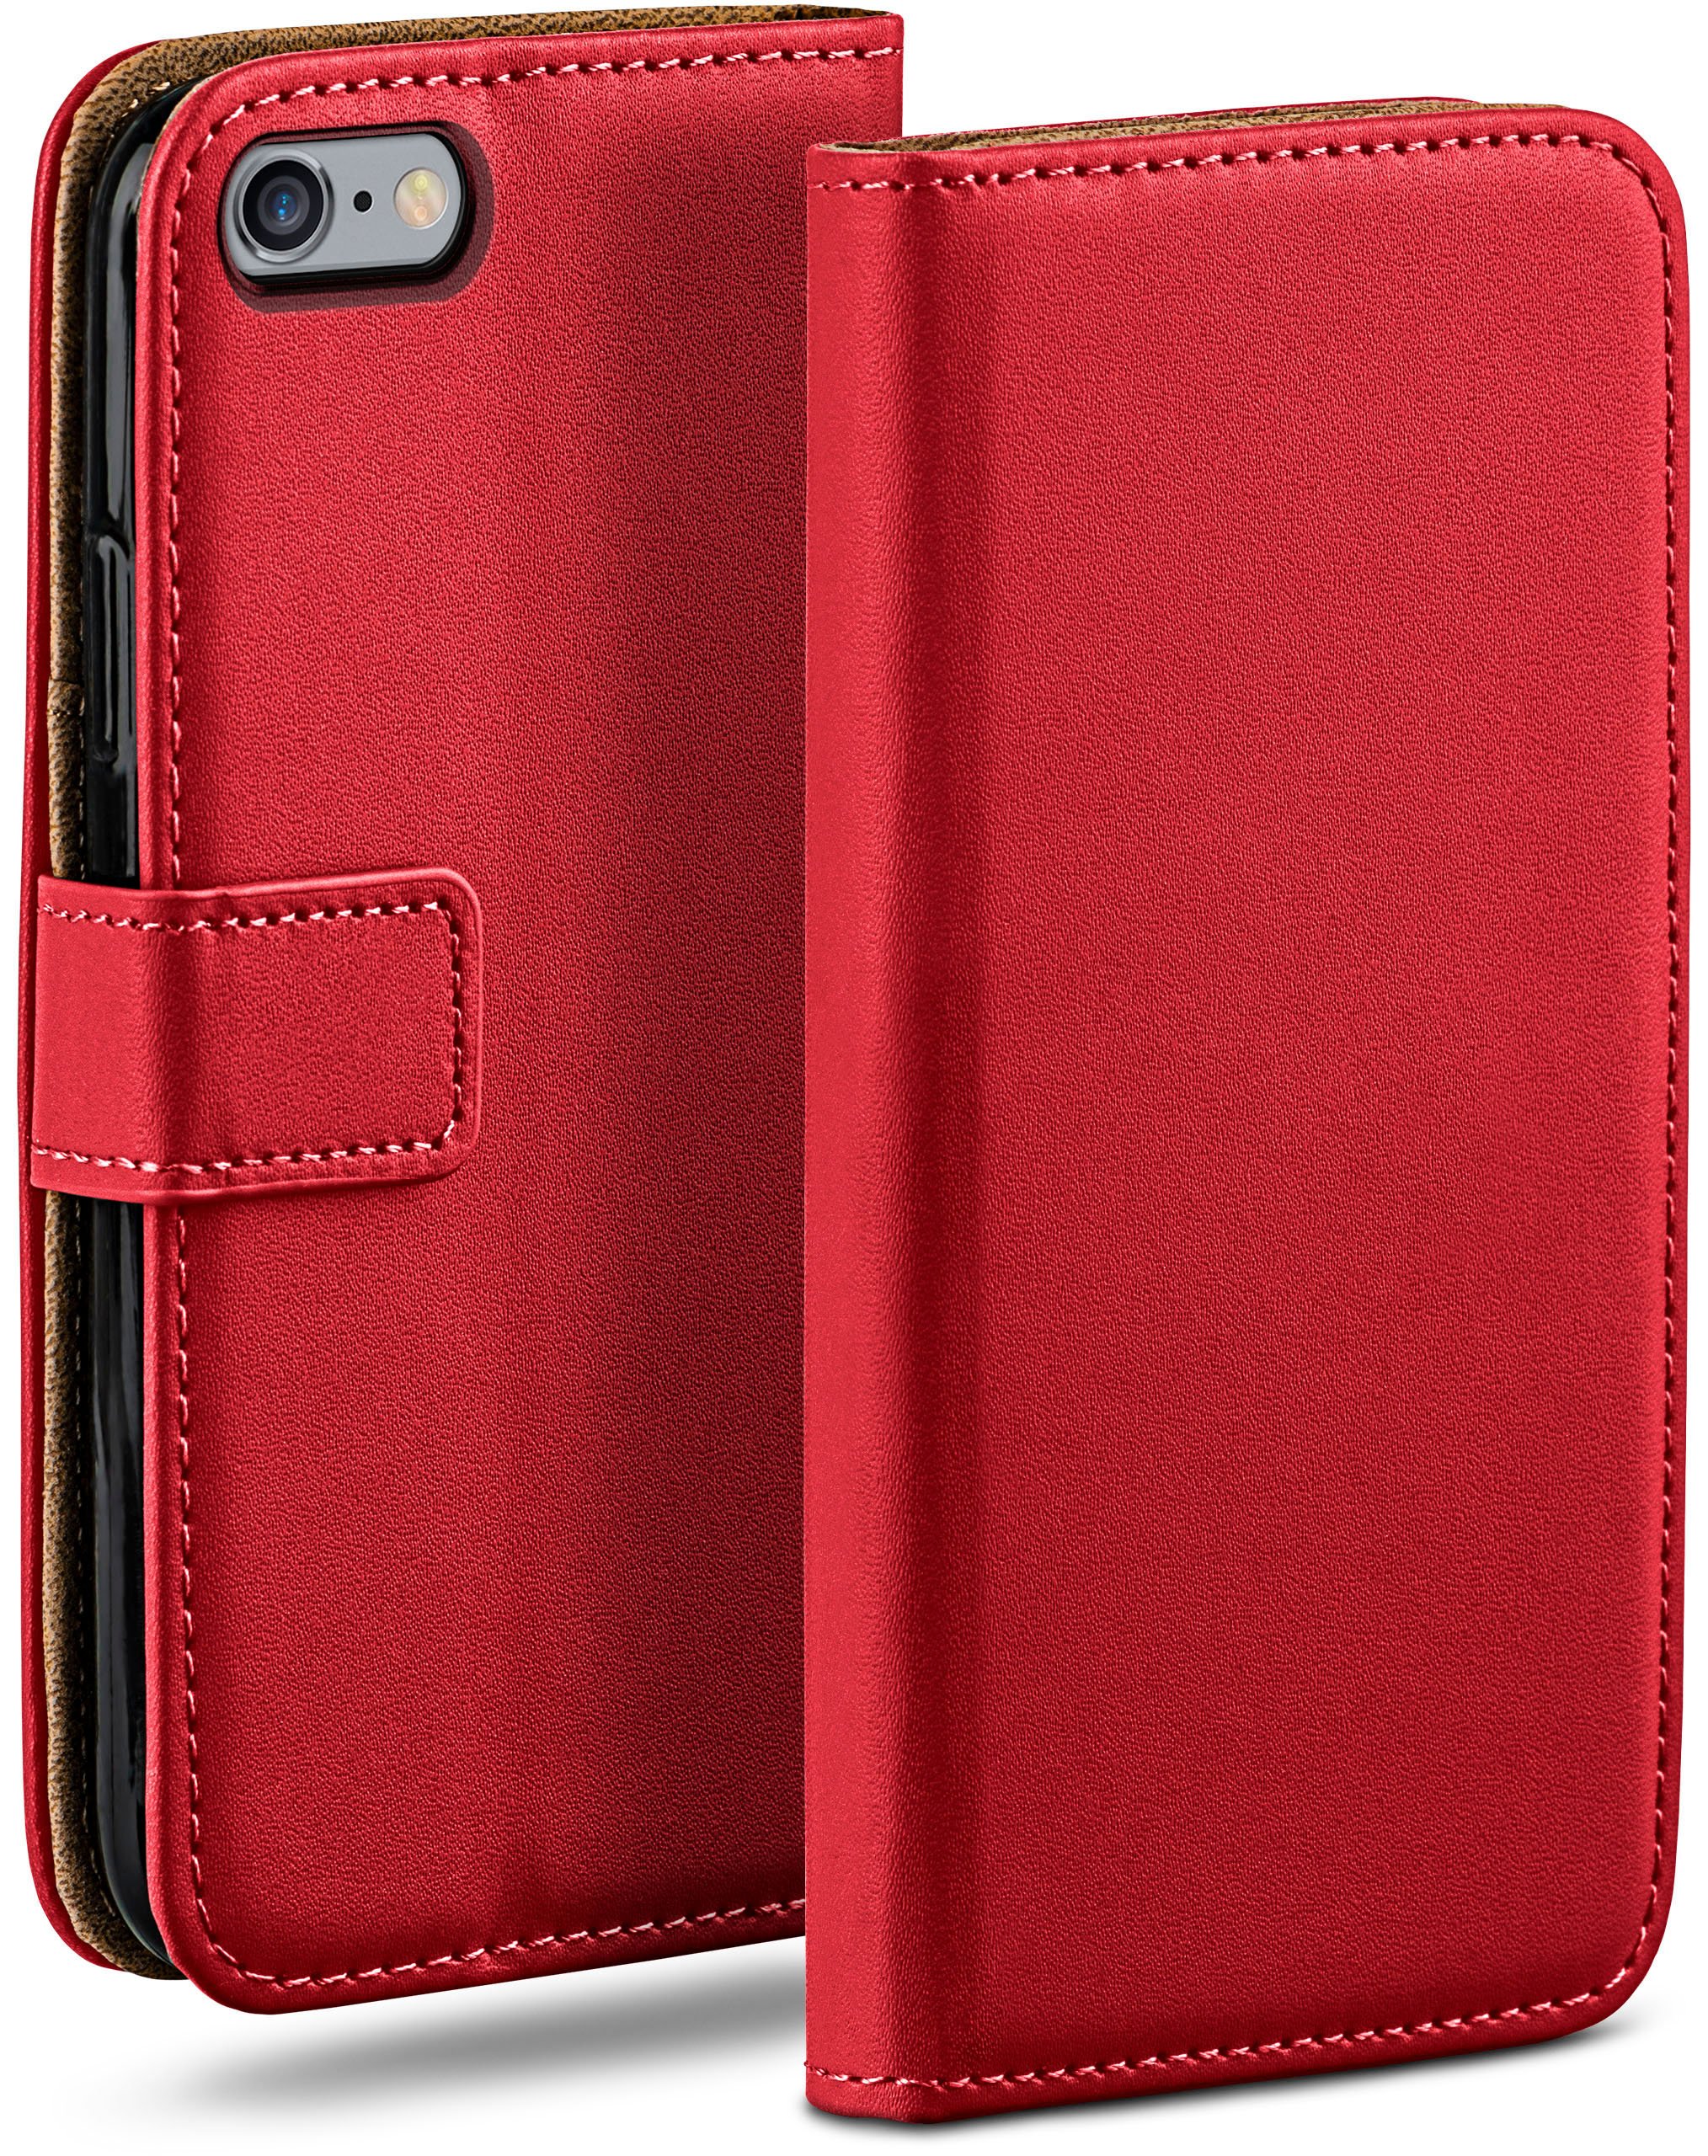 MOEX Book Case, iPhone Bookcover, 6, Apple, Blazing-Red 6s / iPhone